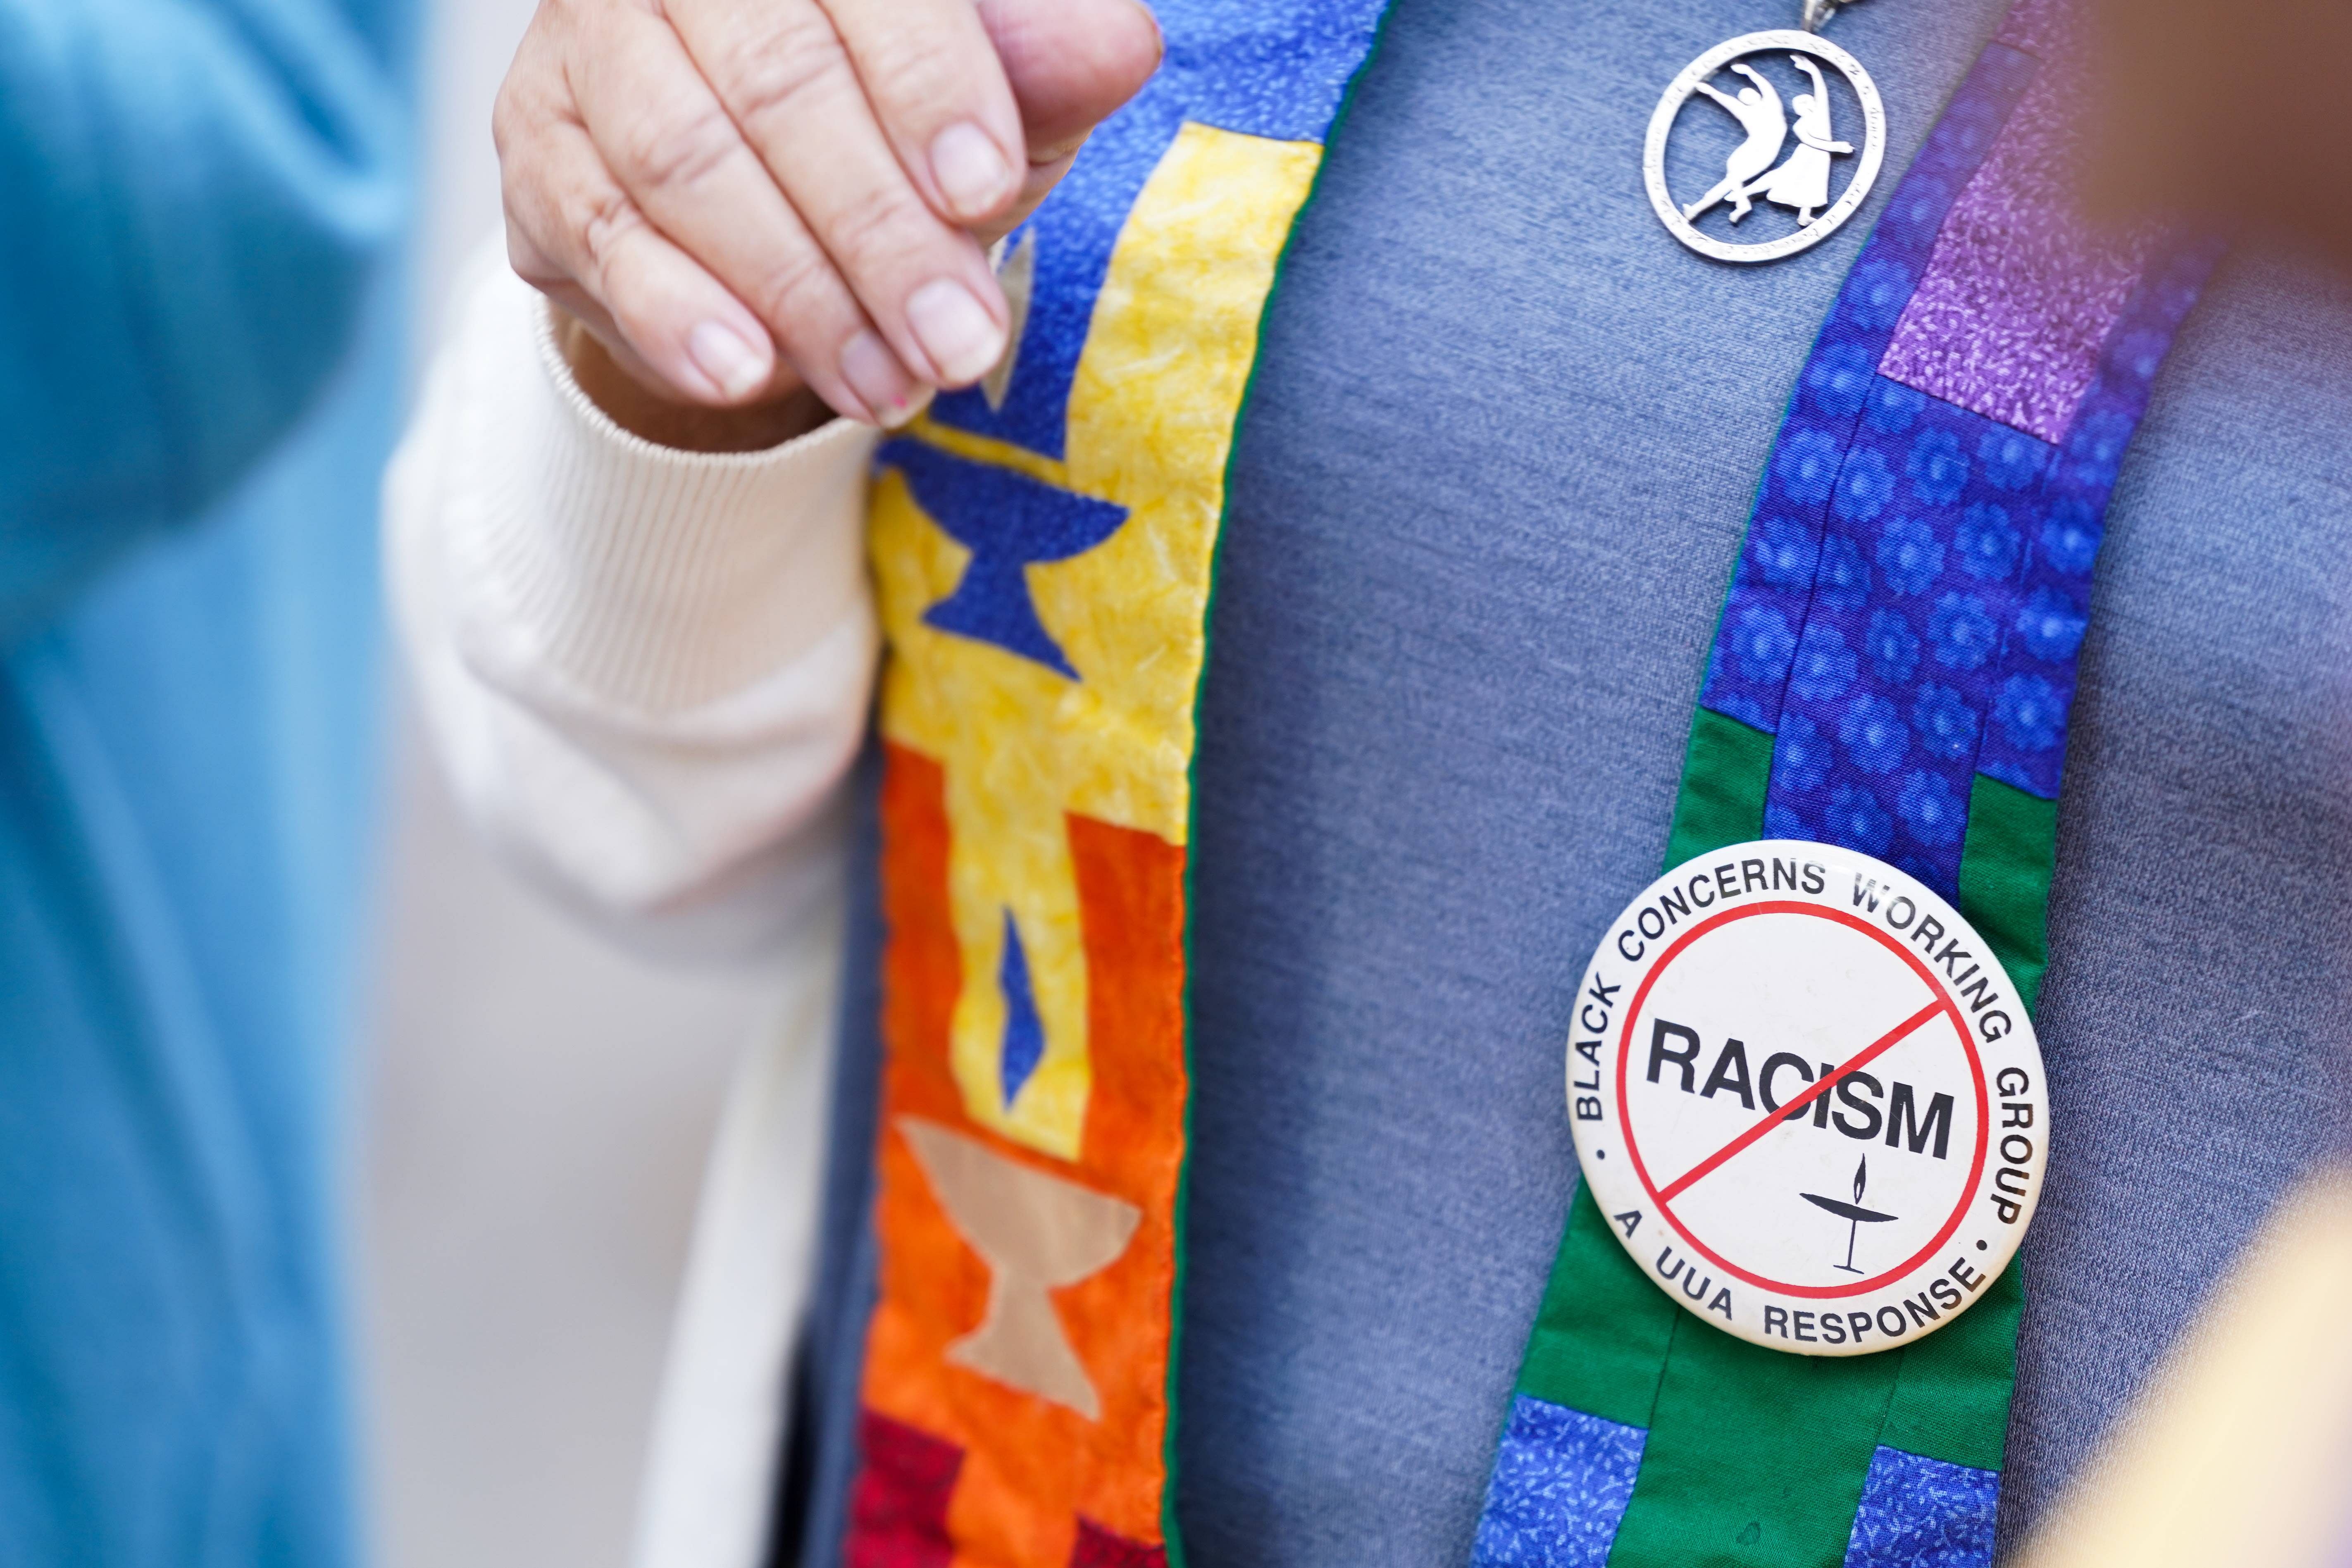 A religious leader wears an anti-racism button at the Glynn County Courthouse as jury selection begins in the trial of the defendants in the shooting death of Ahmaud Arbery. Credit: AFP Photo